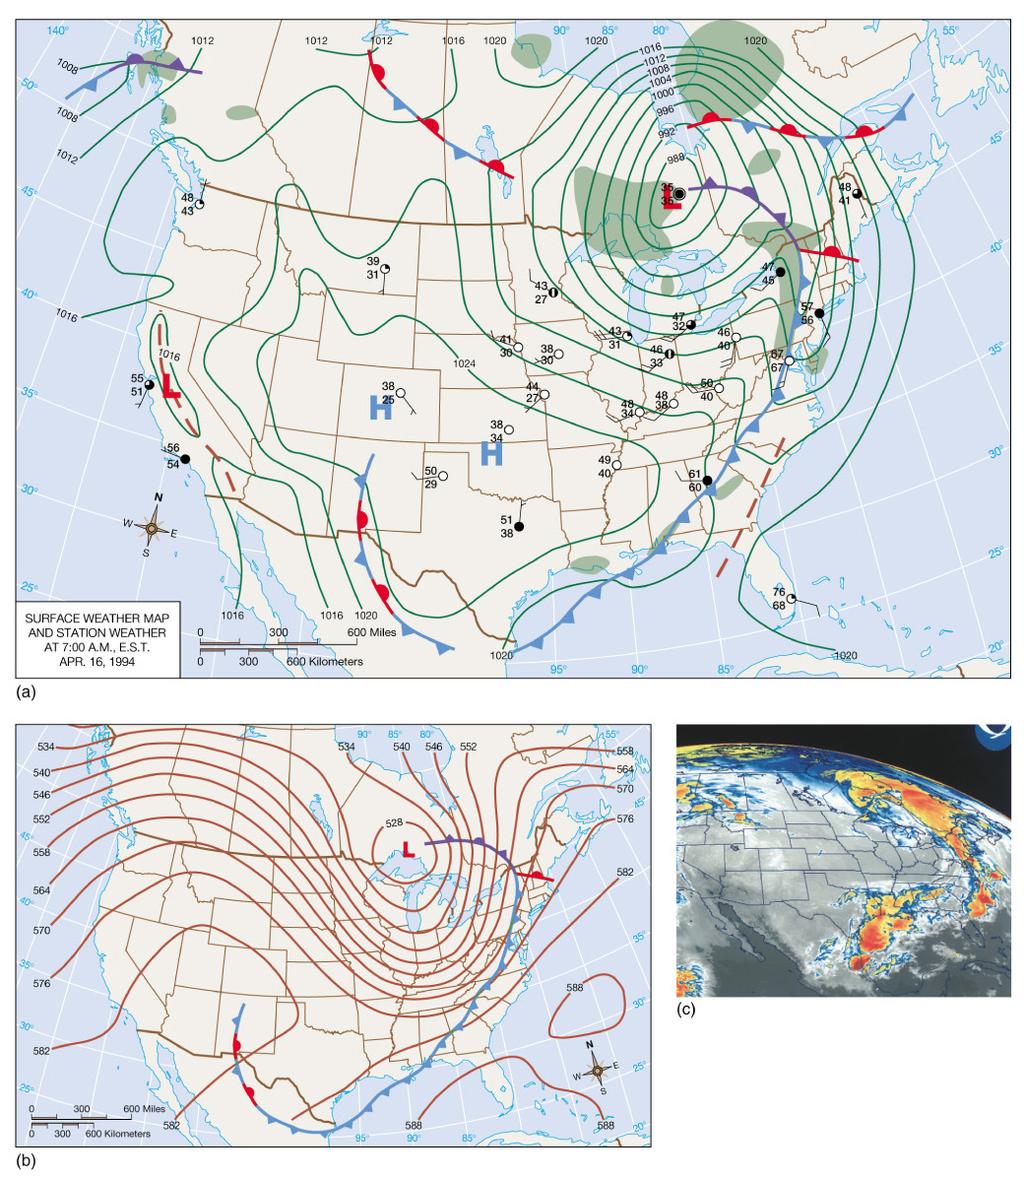 April 16 - The northeasterly movement of the storm system is seen through a comparison of weather maps over a 24-hour period Occlusion occurs as the low moves over the northern